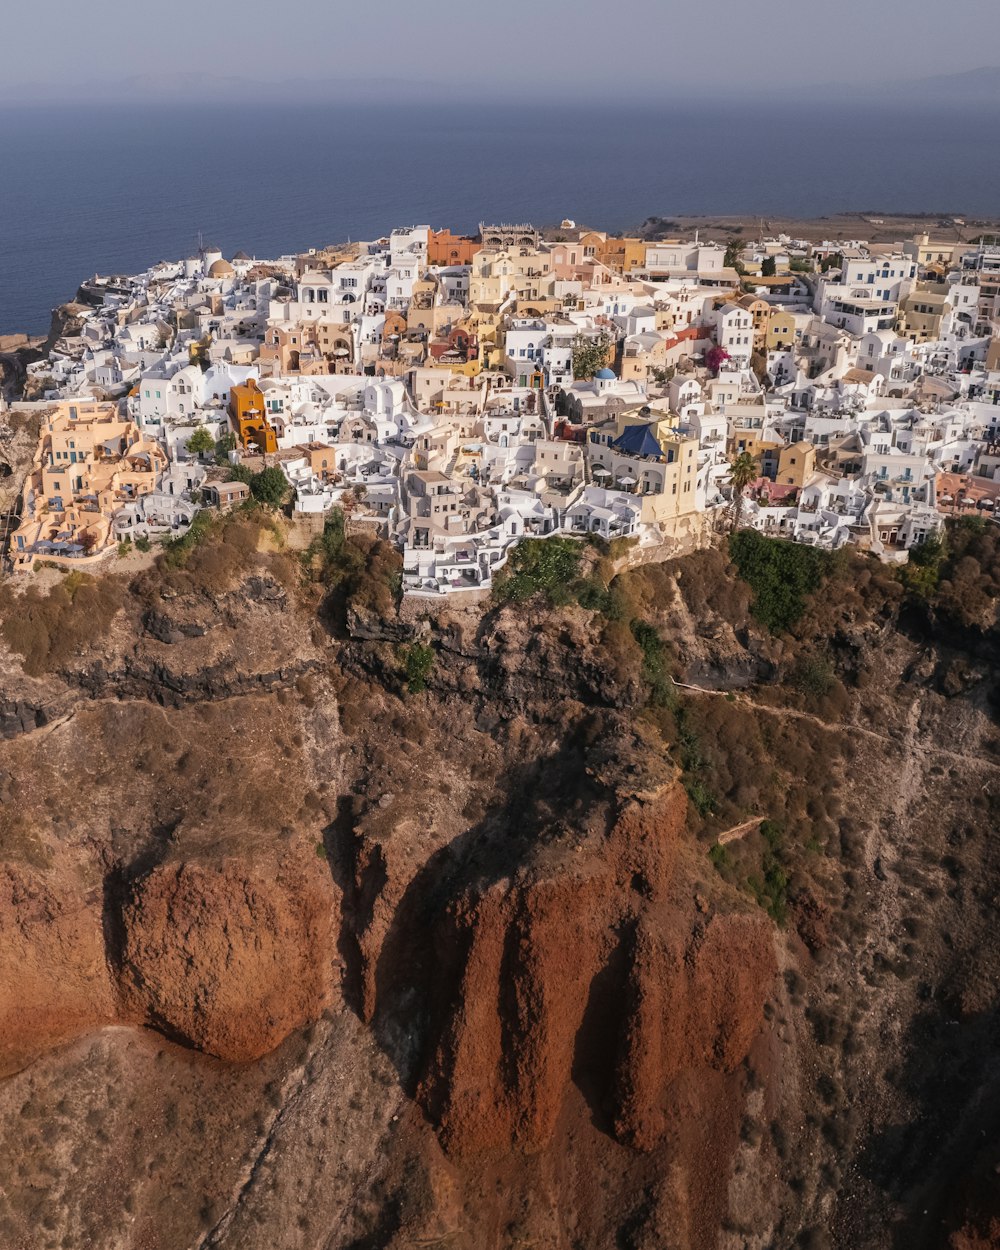 a view of a city on a cliff near the ocean